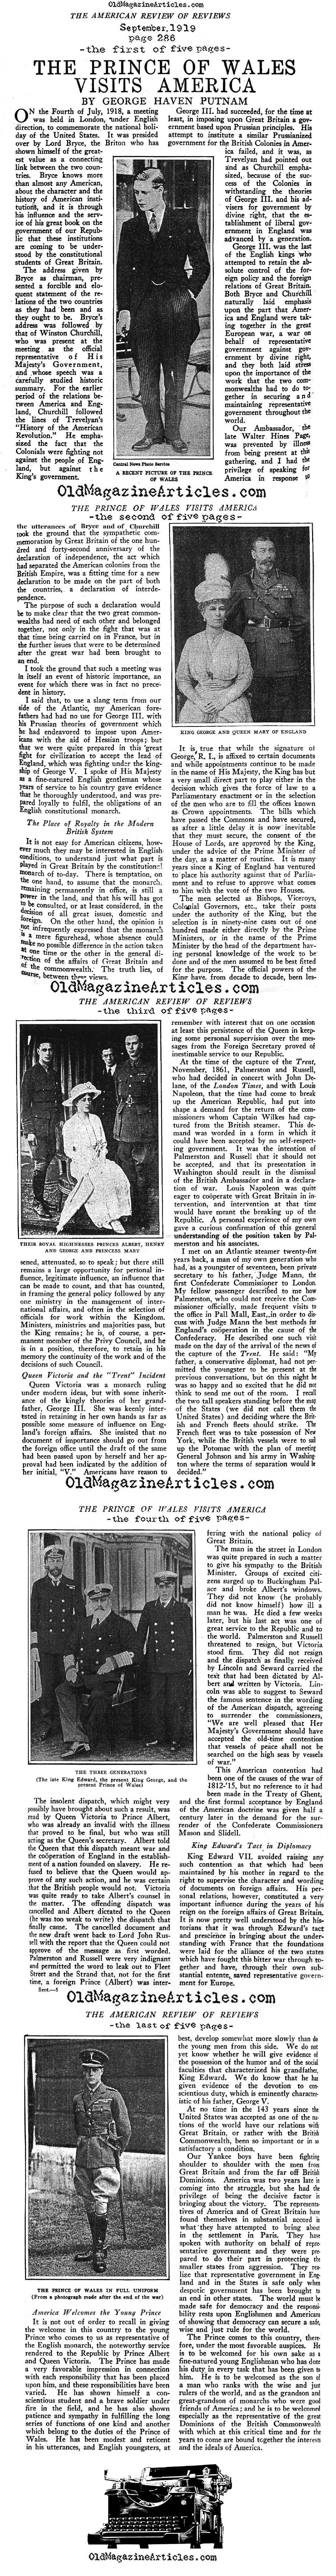 The Prince of Wales Visits America (Review of Reviews, 1919)